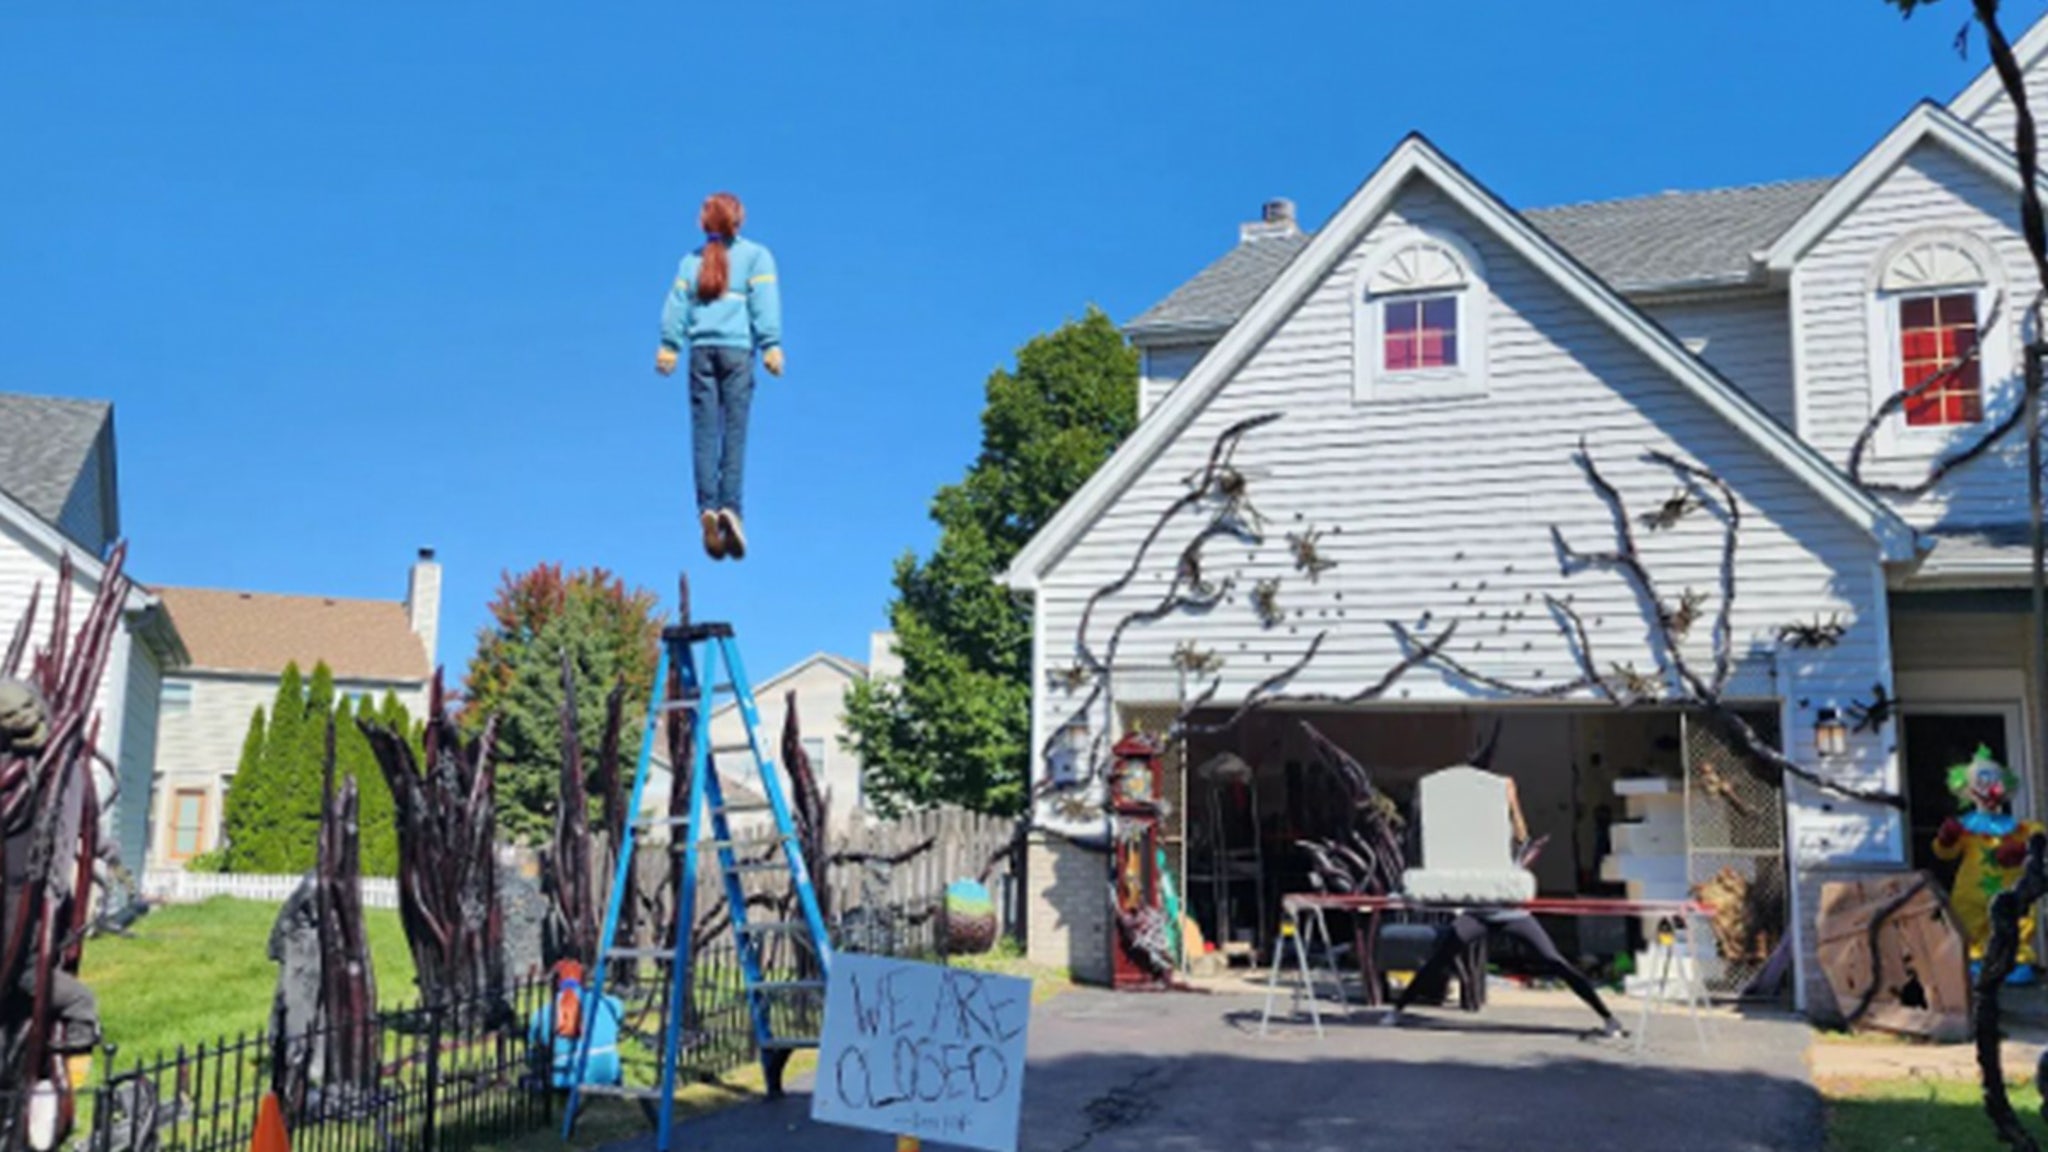 Viral 'Stranger Things' Halloween Display Back Up After Neighbor Complains